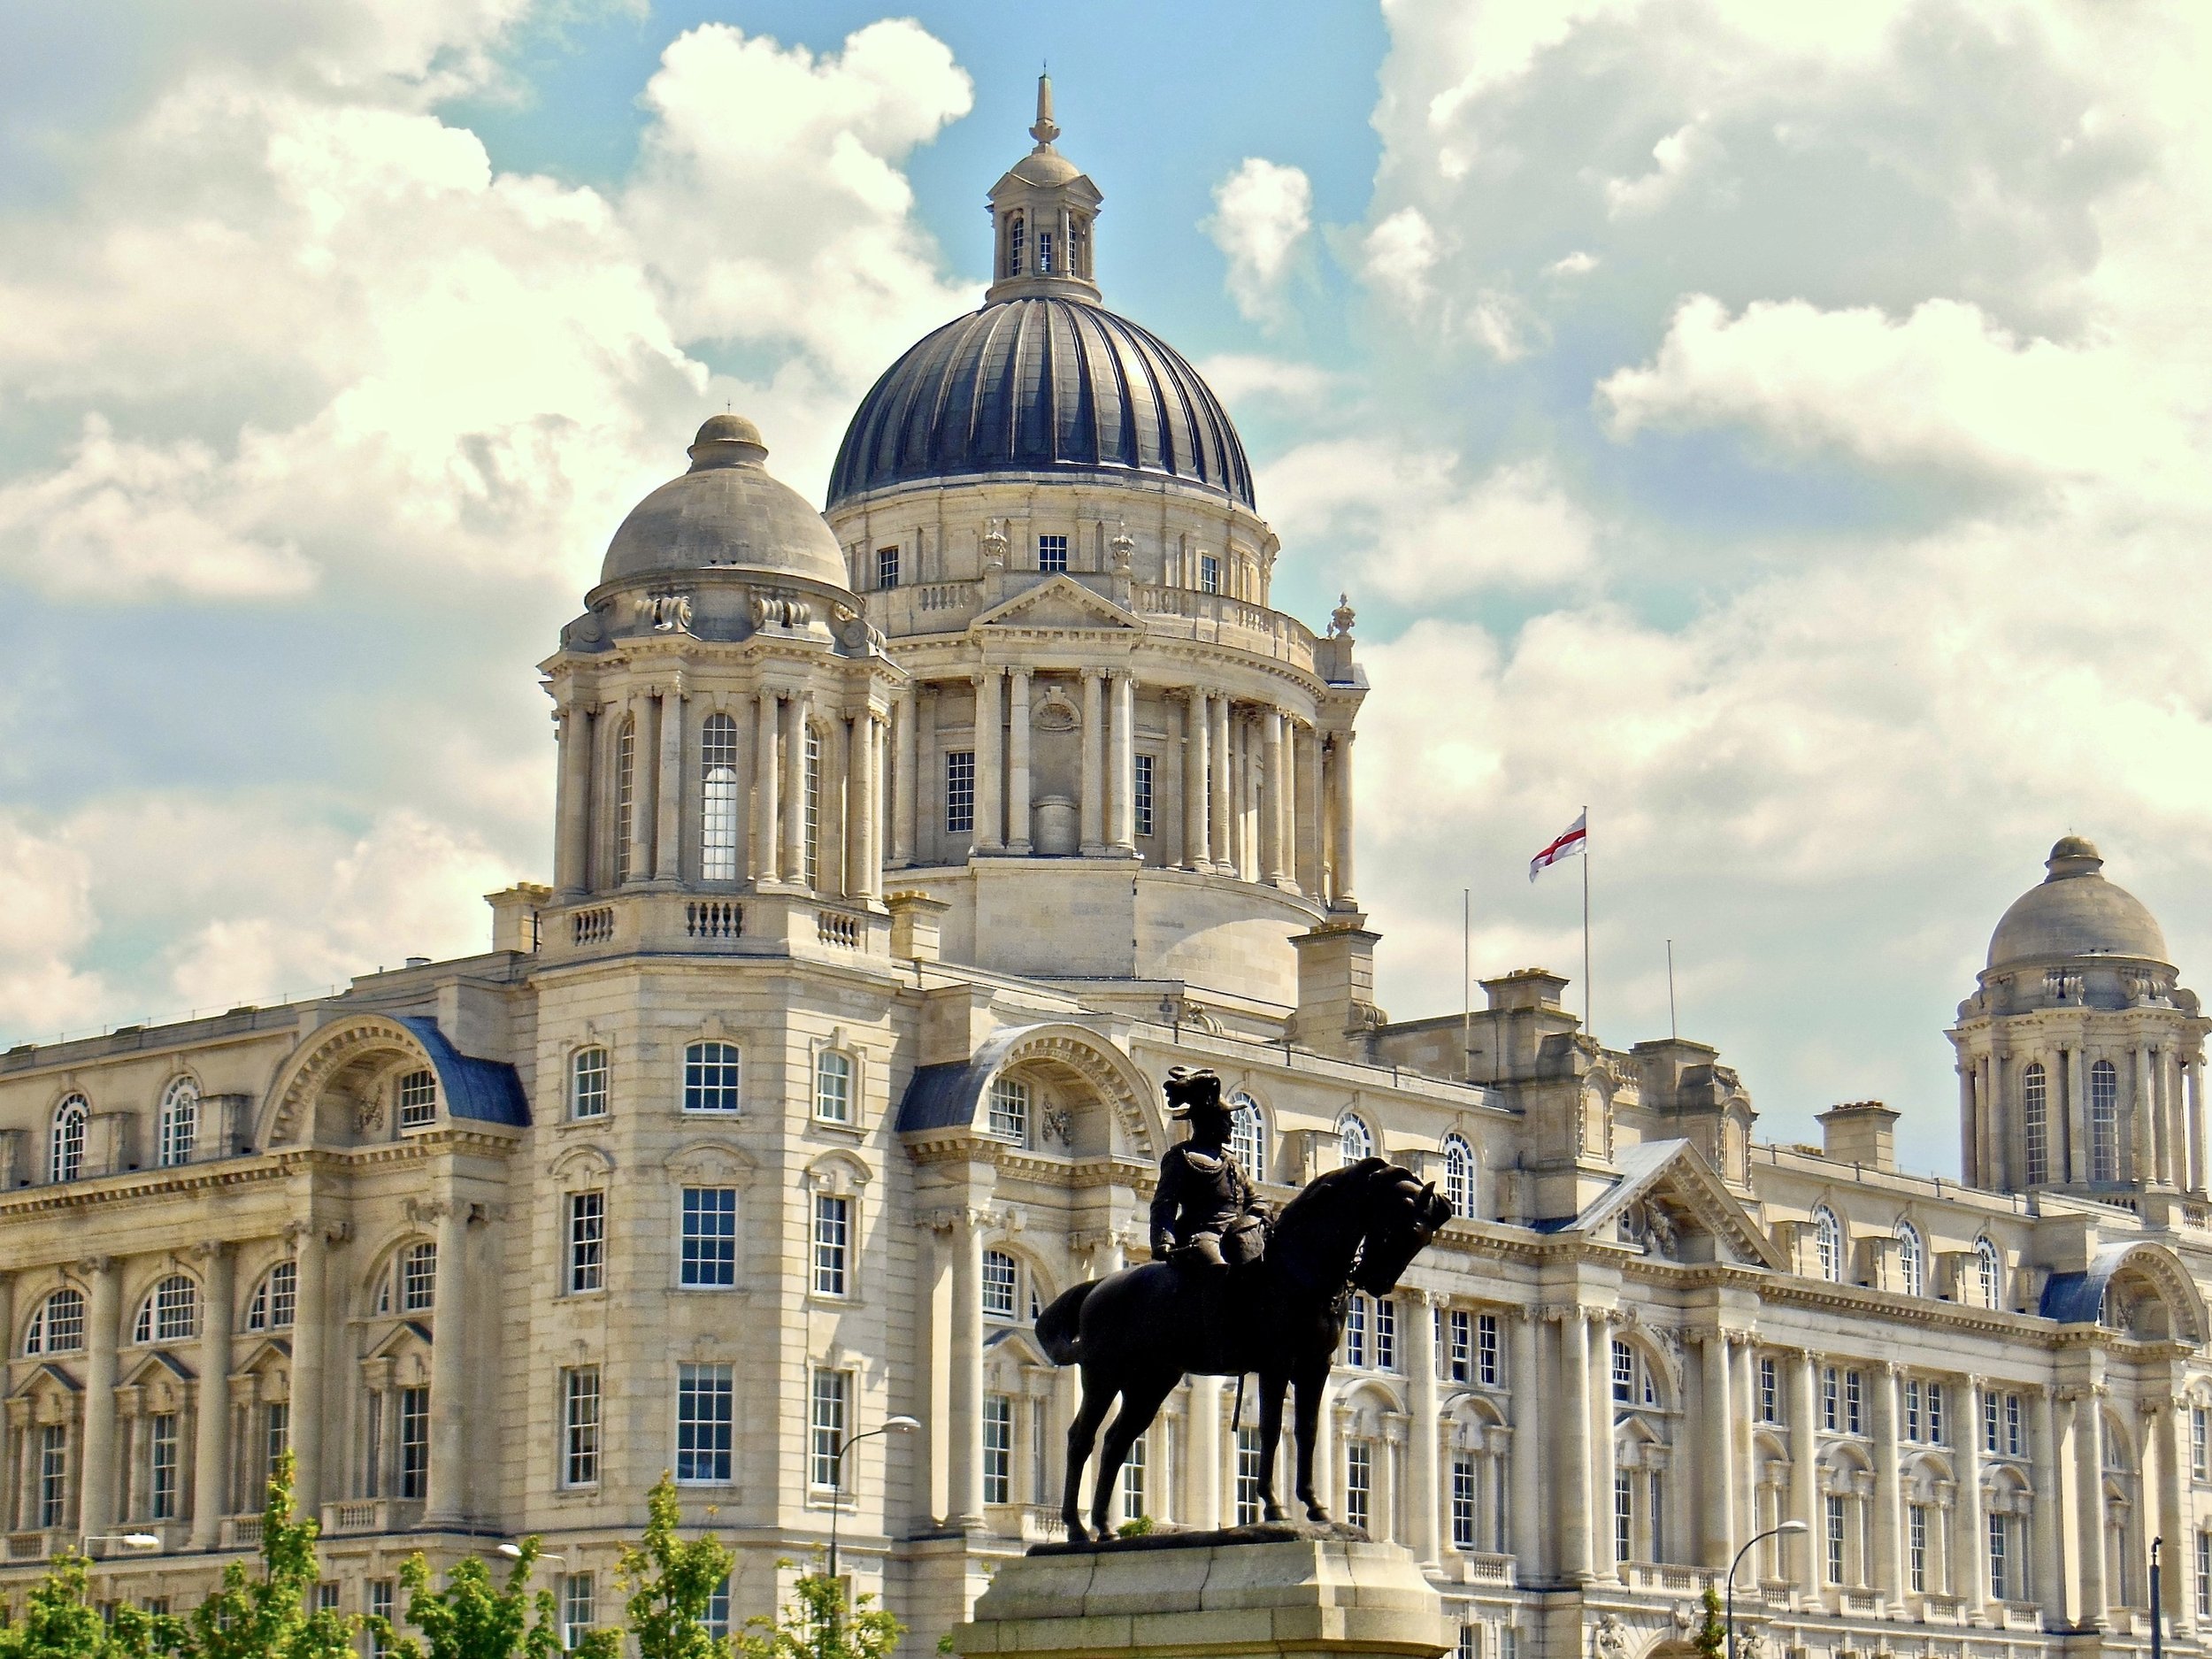 Standing tall at The Port of Liverpool building